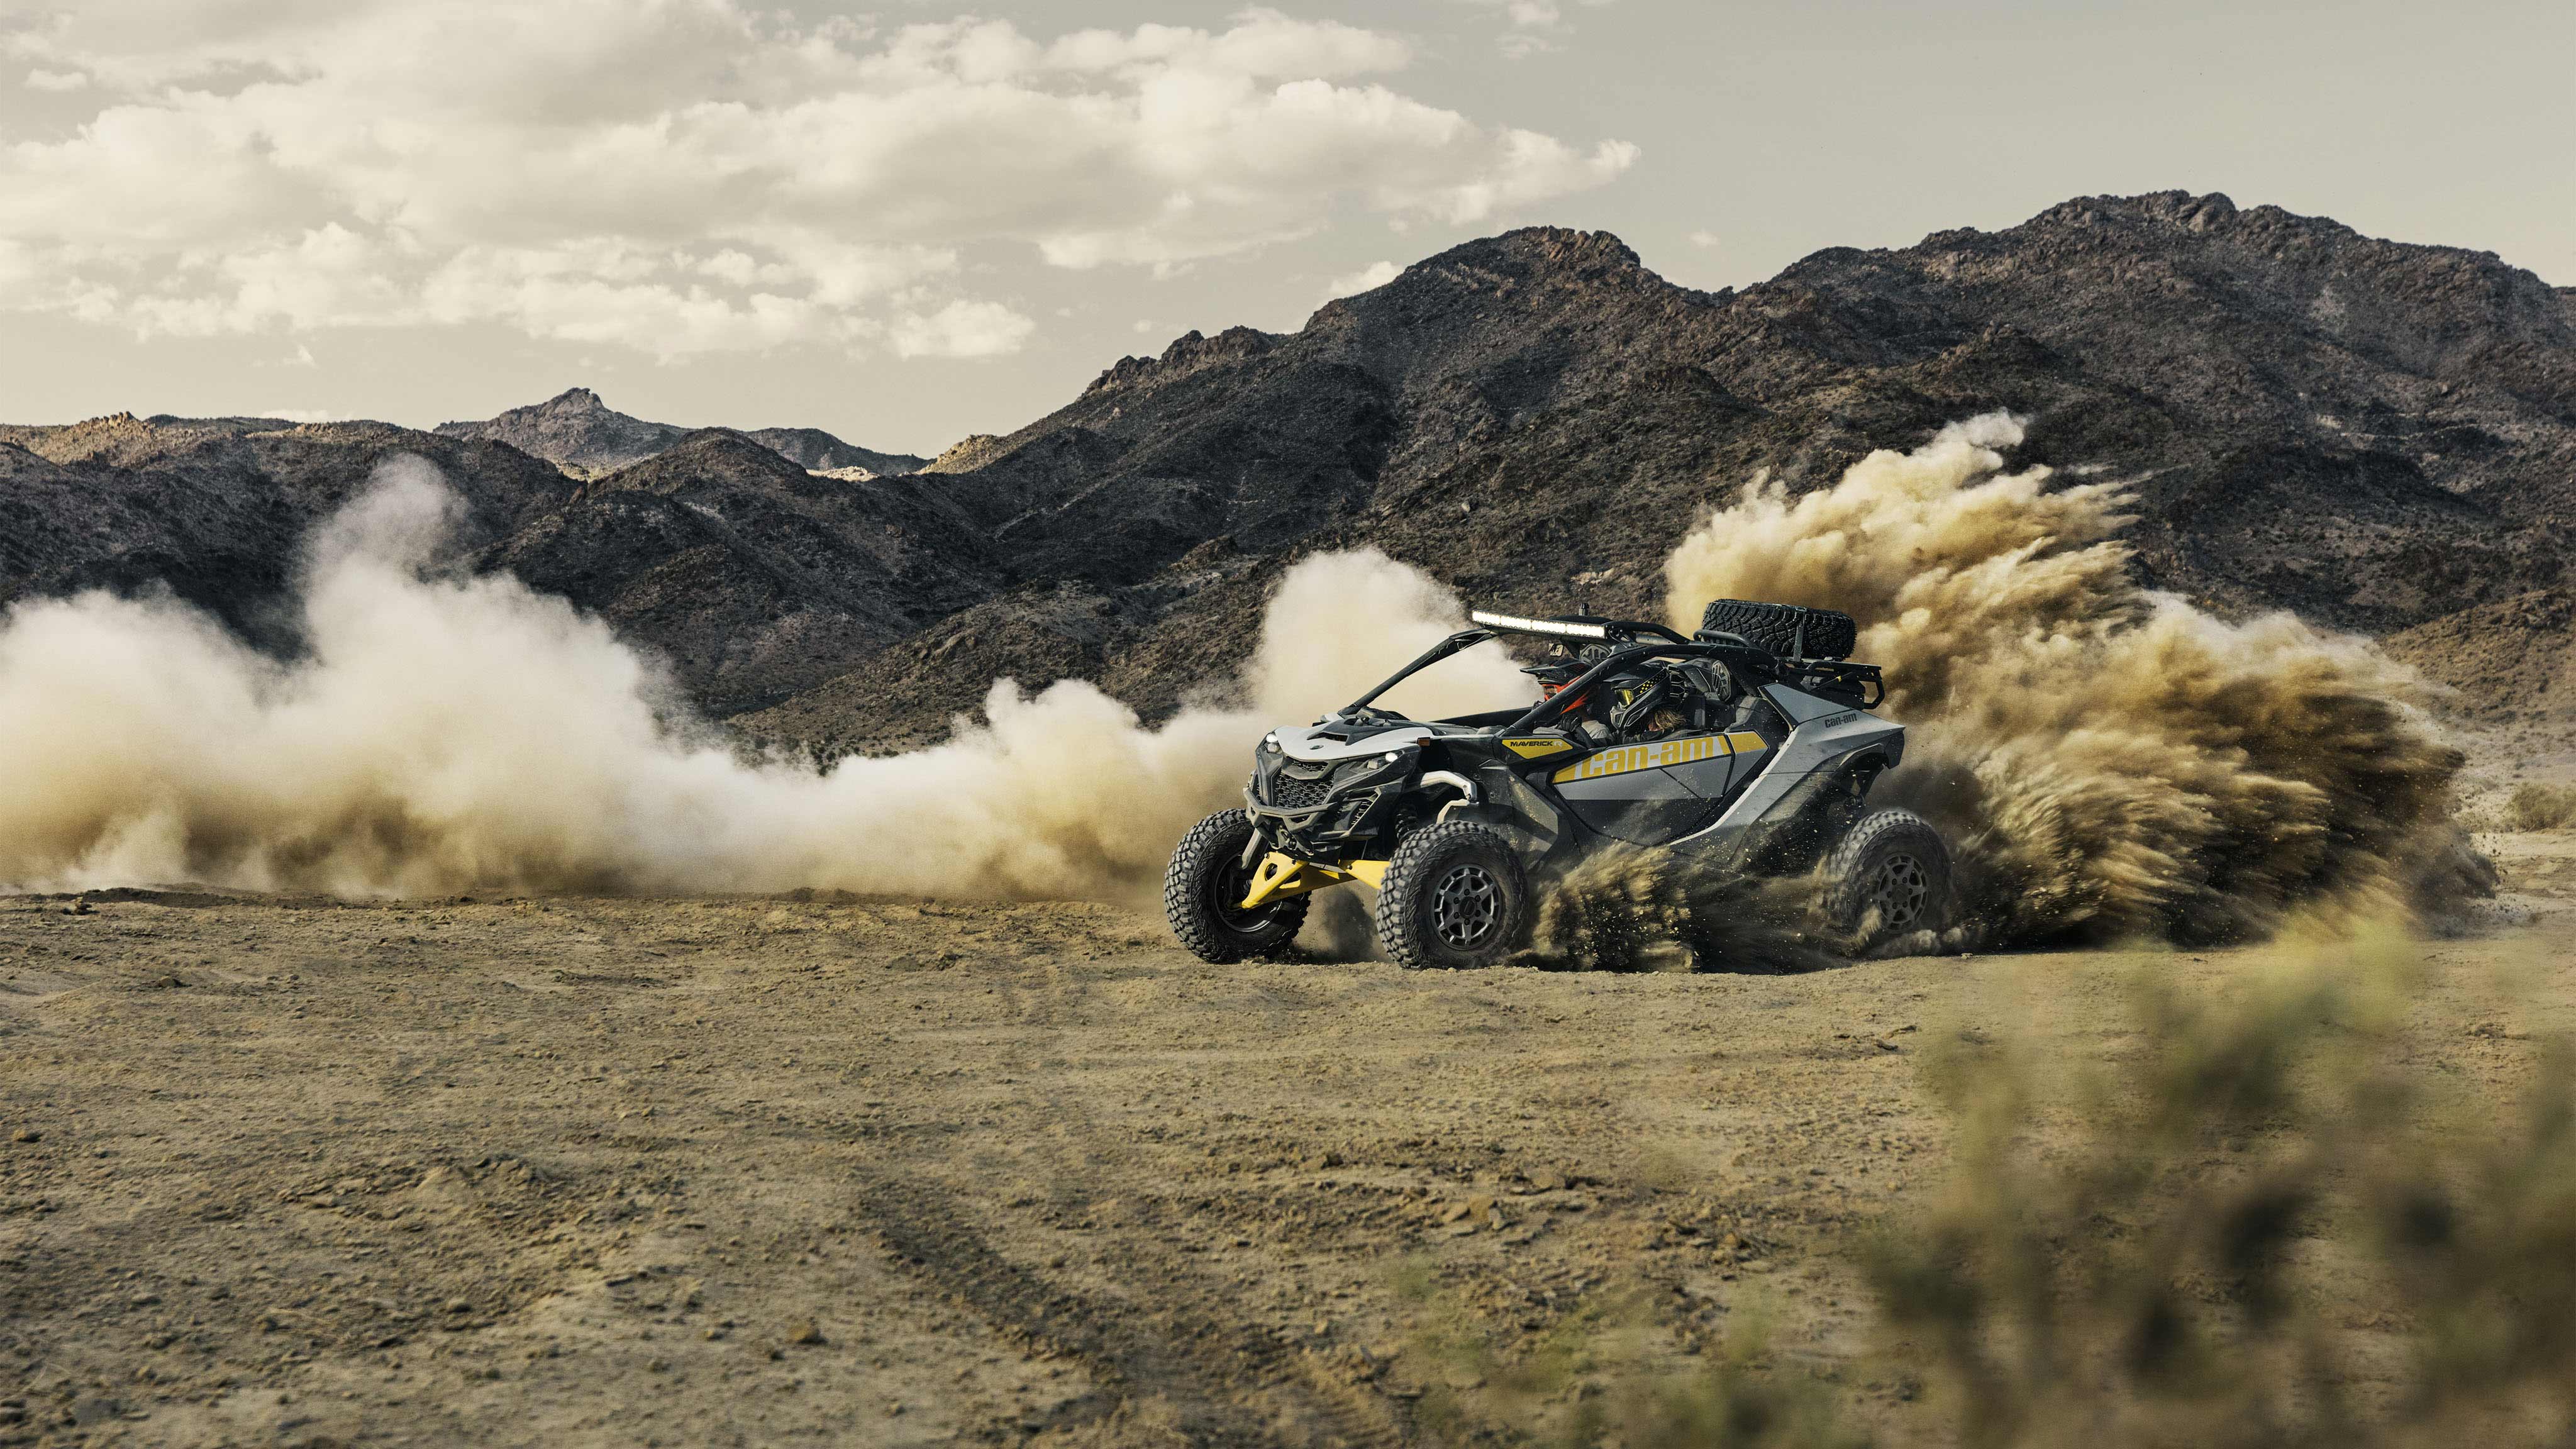 Two riders in a Can-Am Maverick R making a hard turn on a dirt road